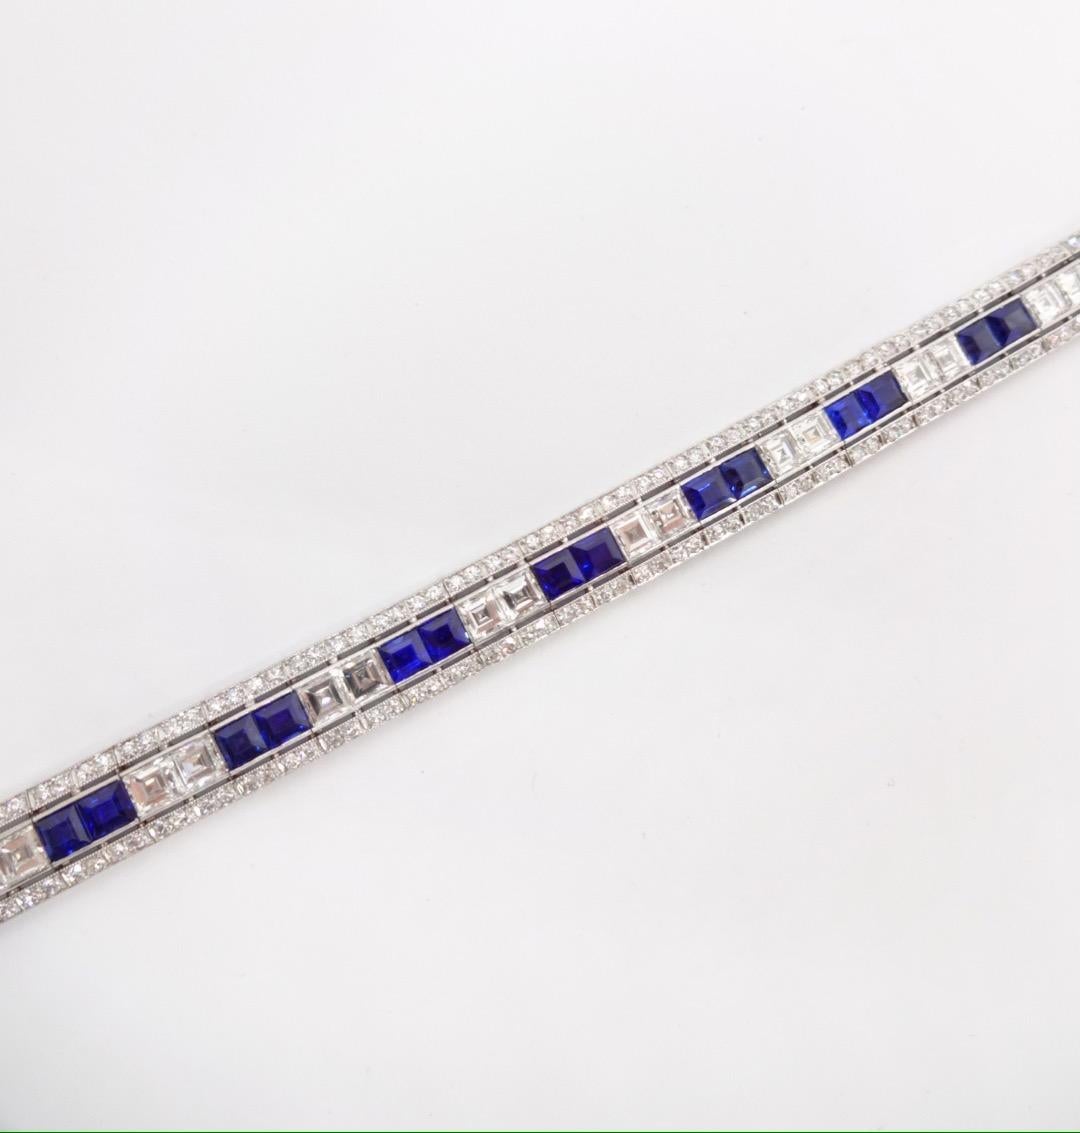 A gorgeous classic line bracelet features alternating pairs of square cut diamonds with vivid bright royal blue square dut sapphires, bordered on each side by a single row of old european cut diamonds all bead-set to perfection! c1930
We estimate